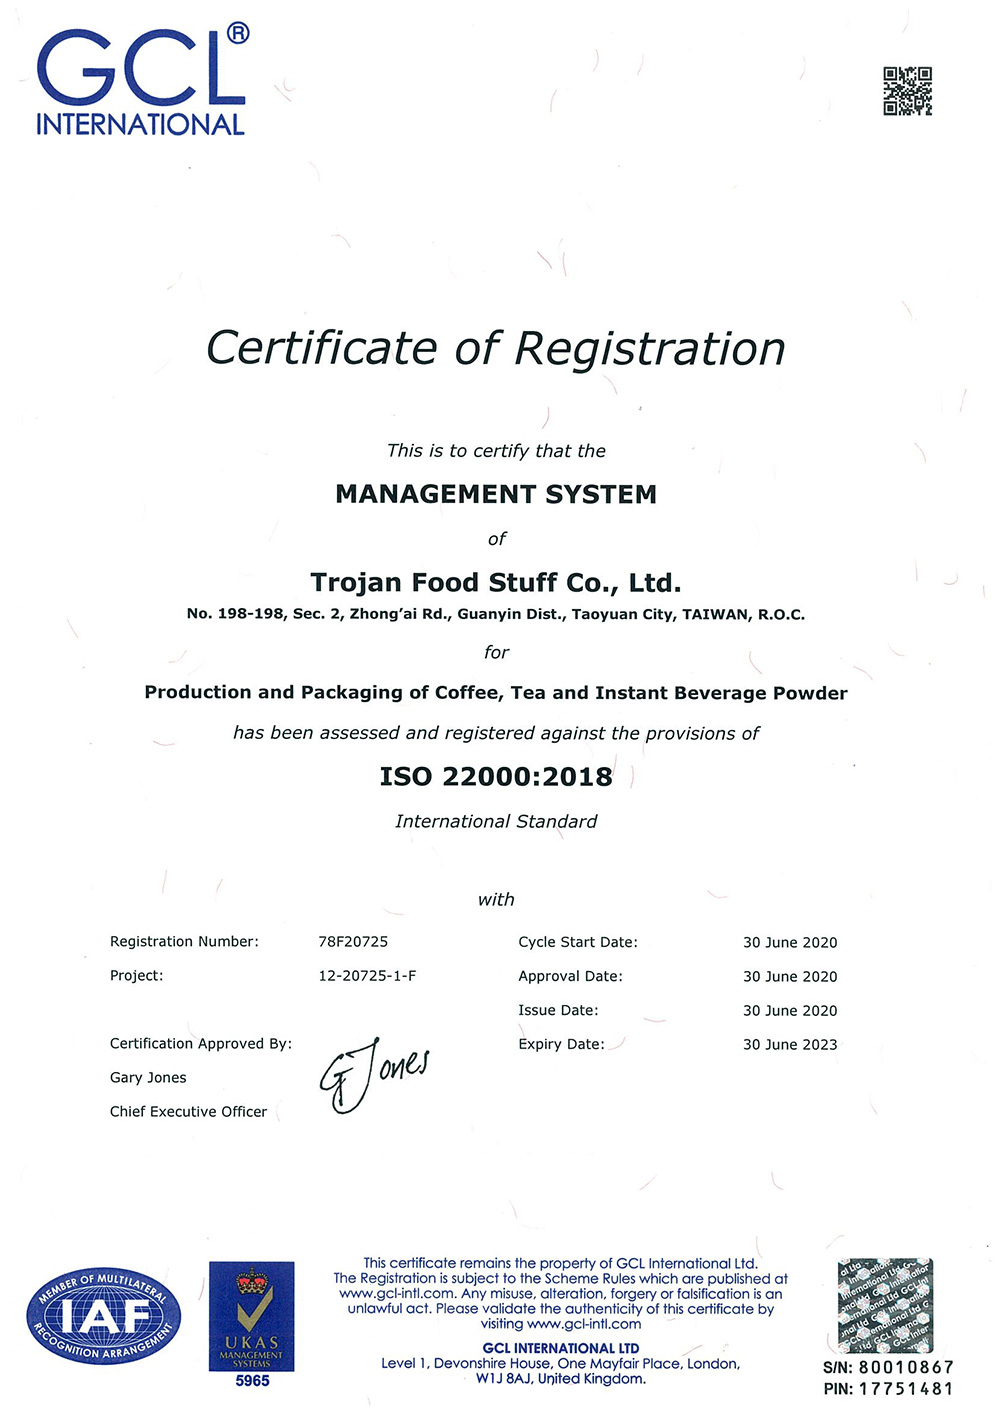 Trojan acquired ISO-22000 certificated in 2019